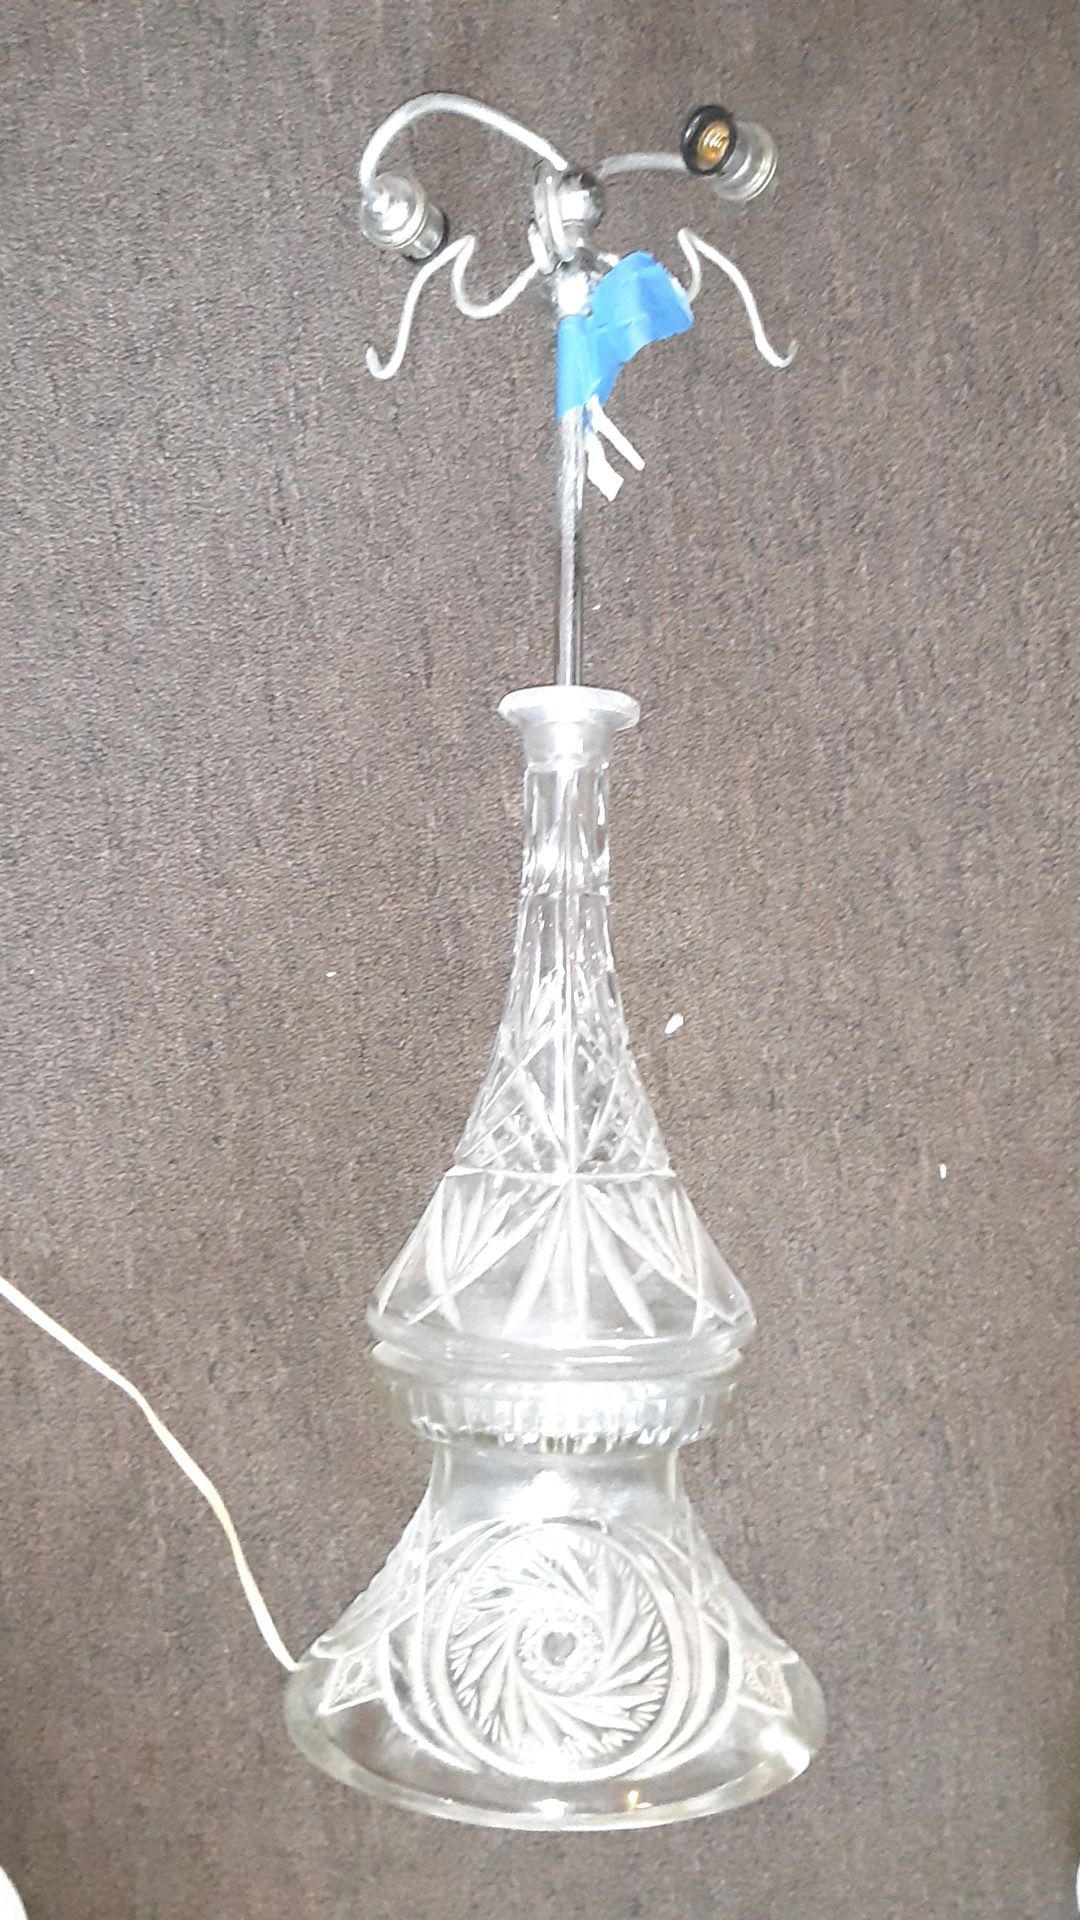 Crystal glass lamp 2ft high